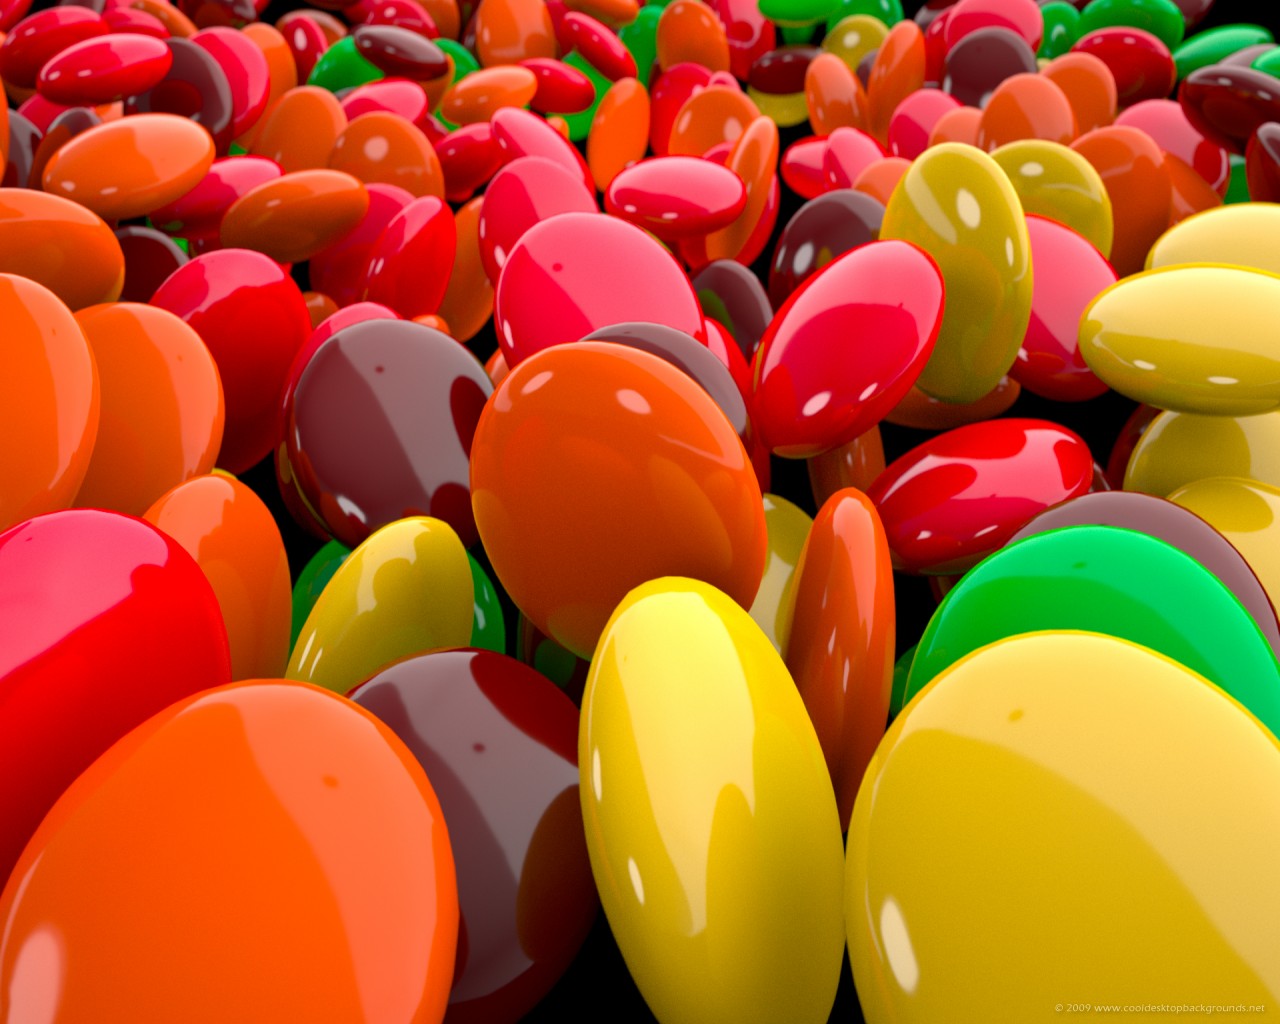 X Multicolored Skittles Candy Background